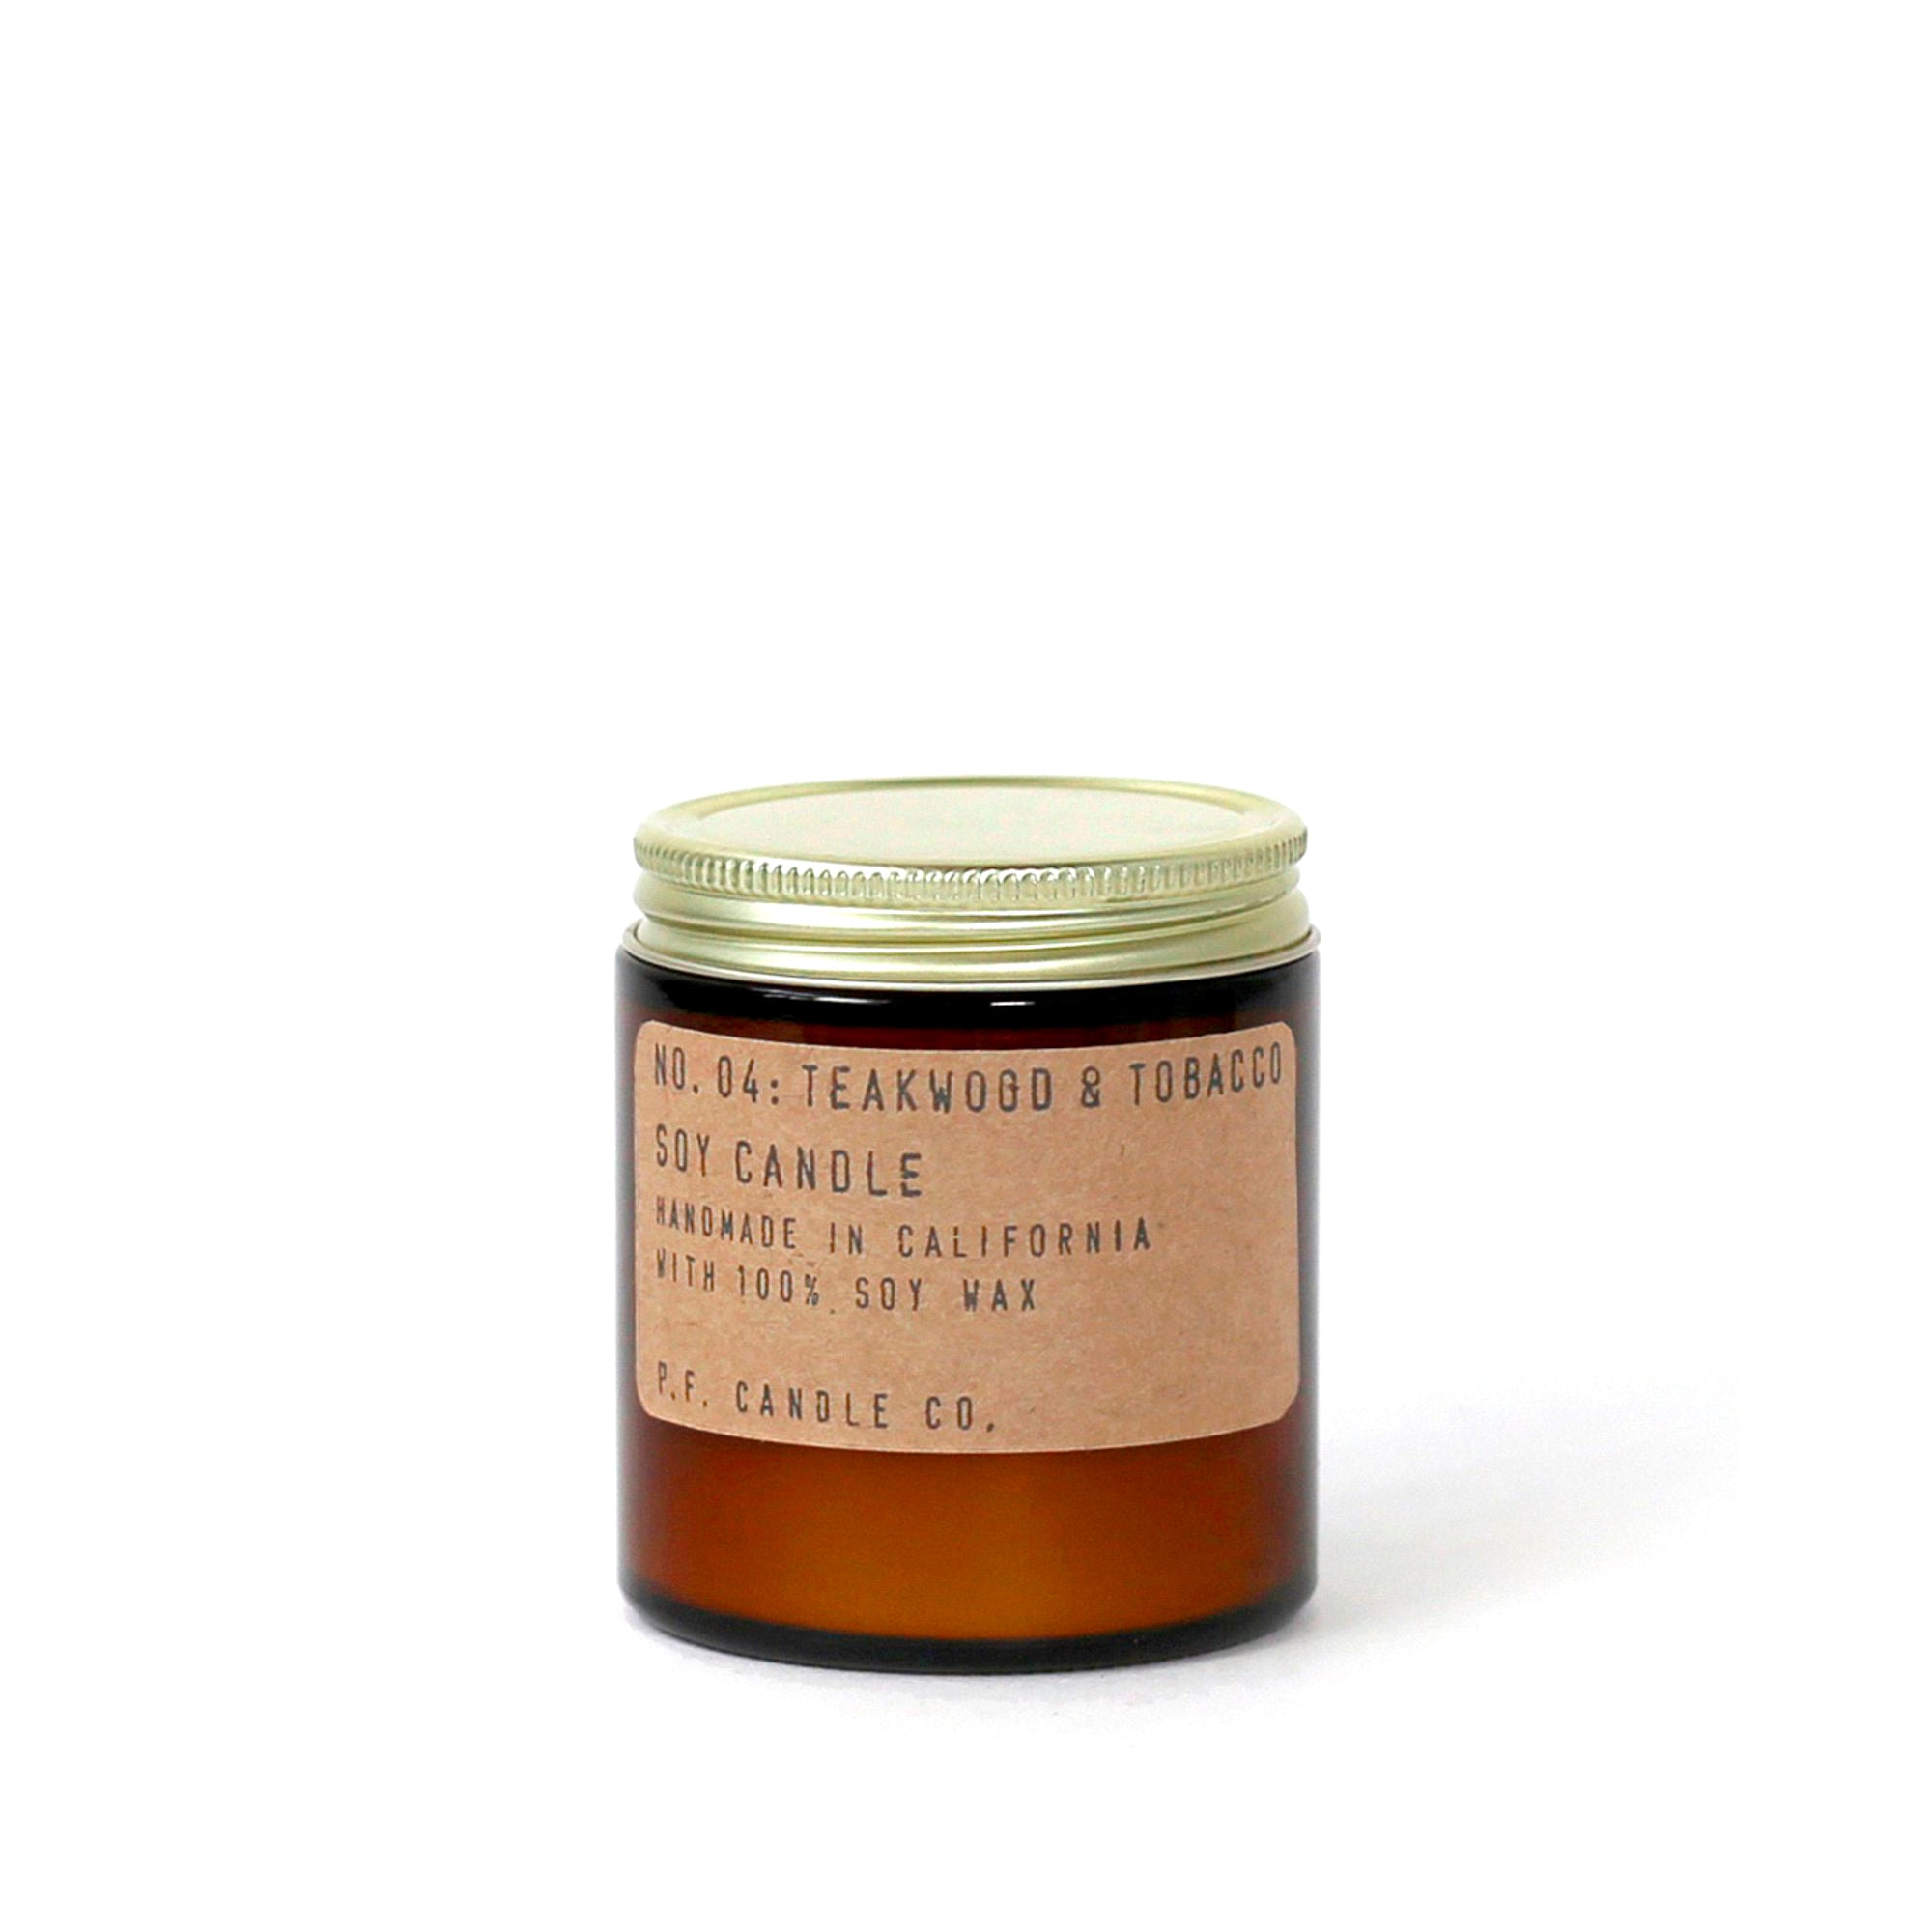 PF Candle Co. Petite bougie